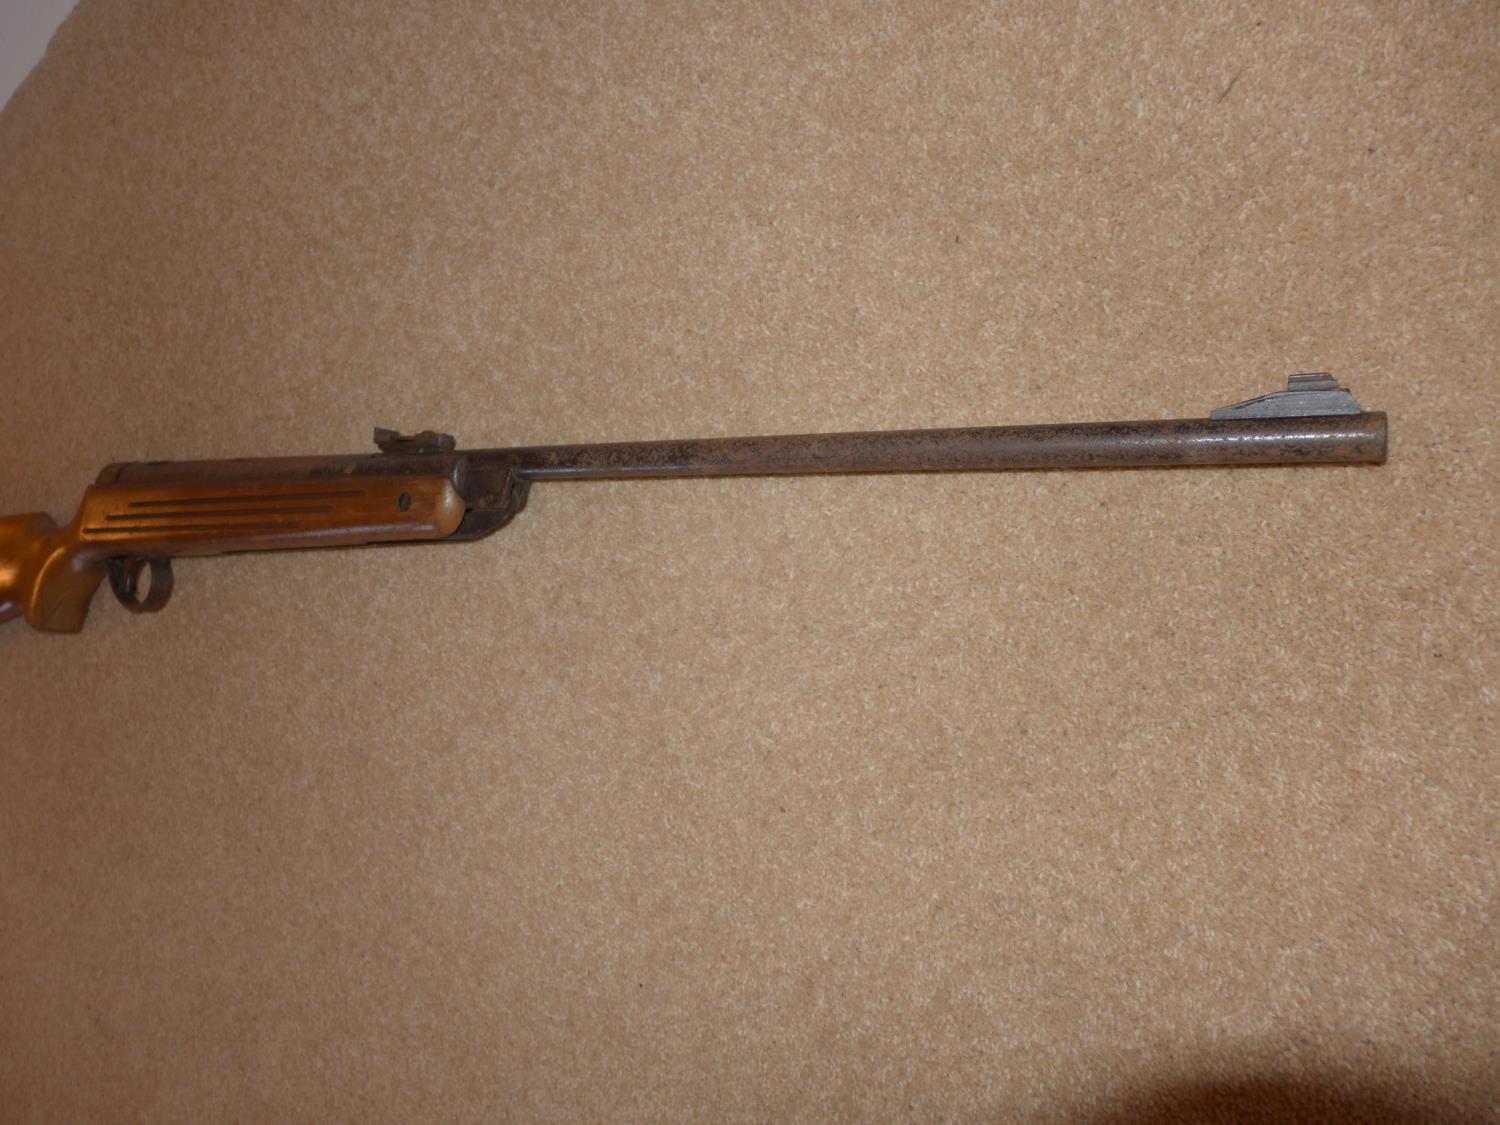 A B.S.A. METEOR .22 CALIBRE AIR RIFLE, 45.5CM BARREL (RUSTED) - Image 4 of 4